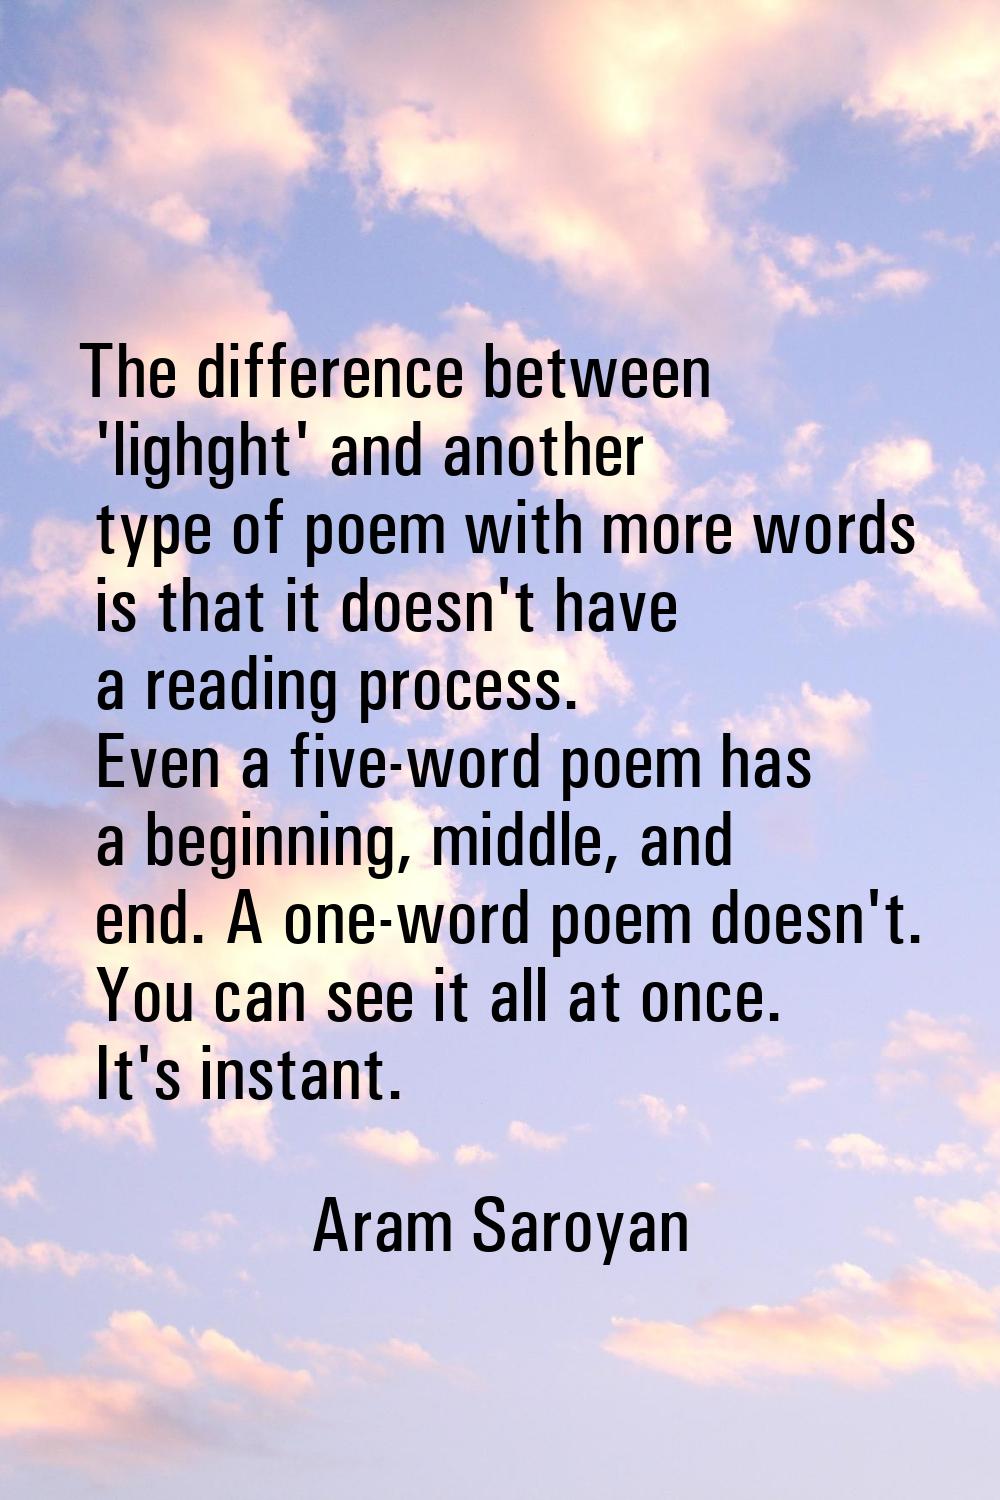 The difference between 'lighght' and another type of poem with more words is that it doesn't have a